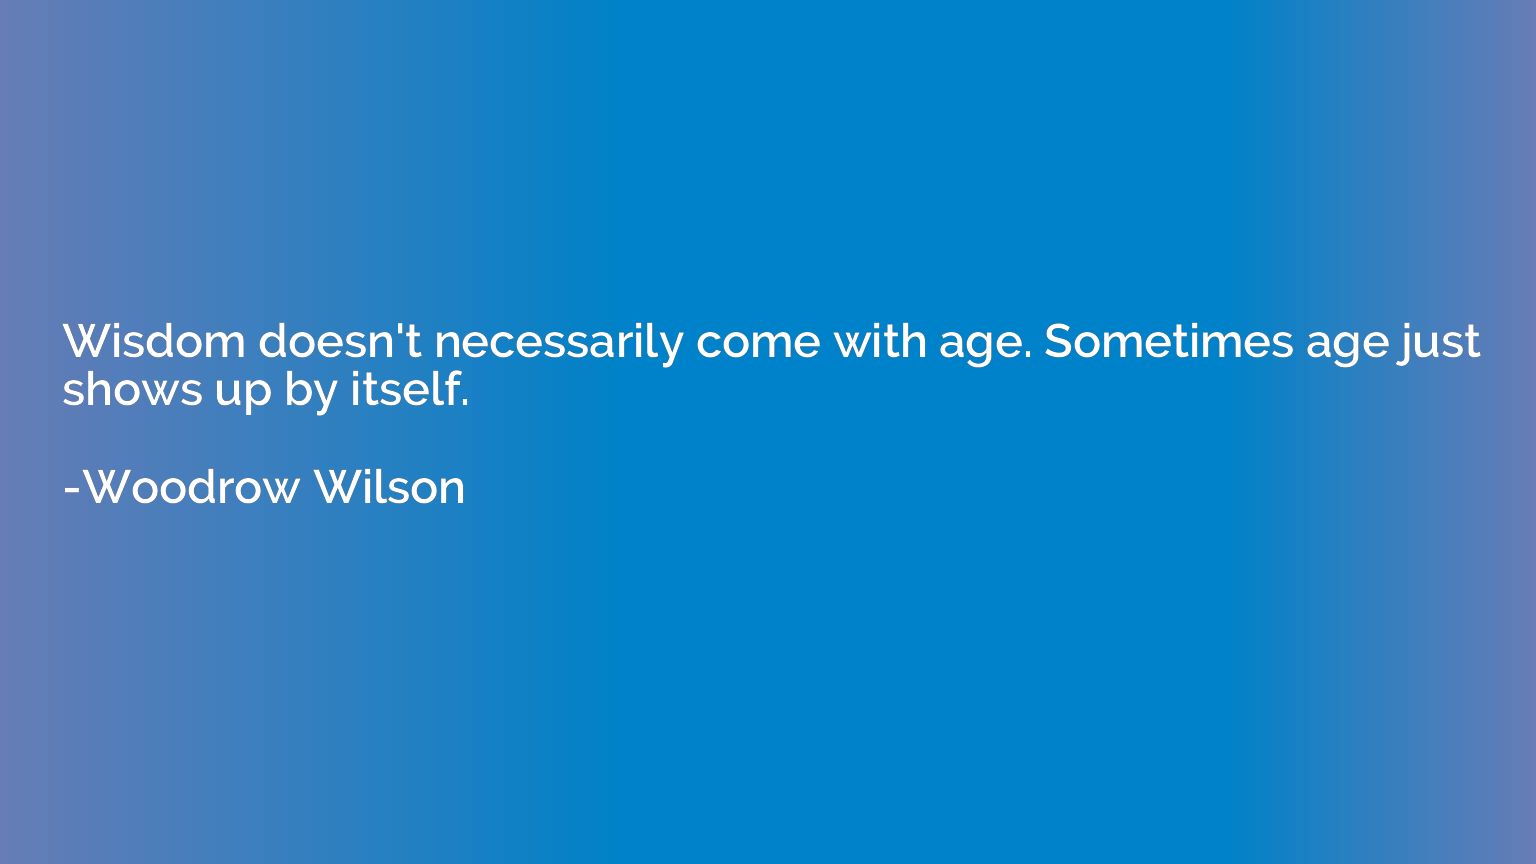 Wisdom doesn't necessarily come with age. Sometimes age just